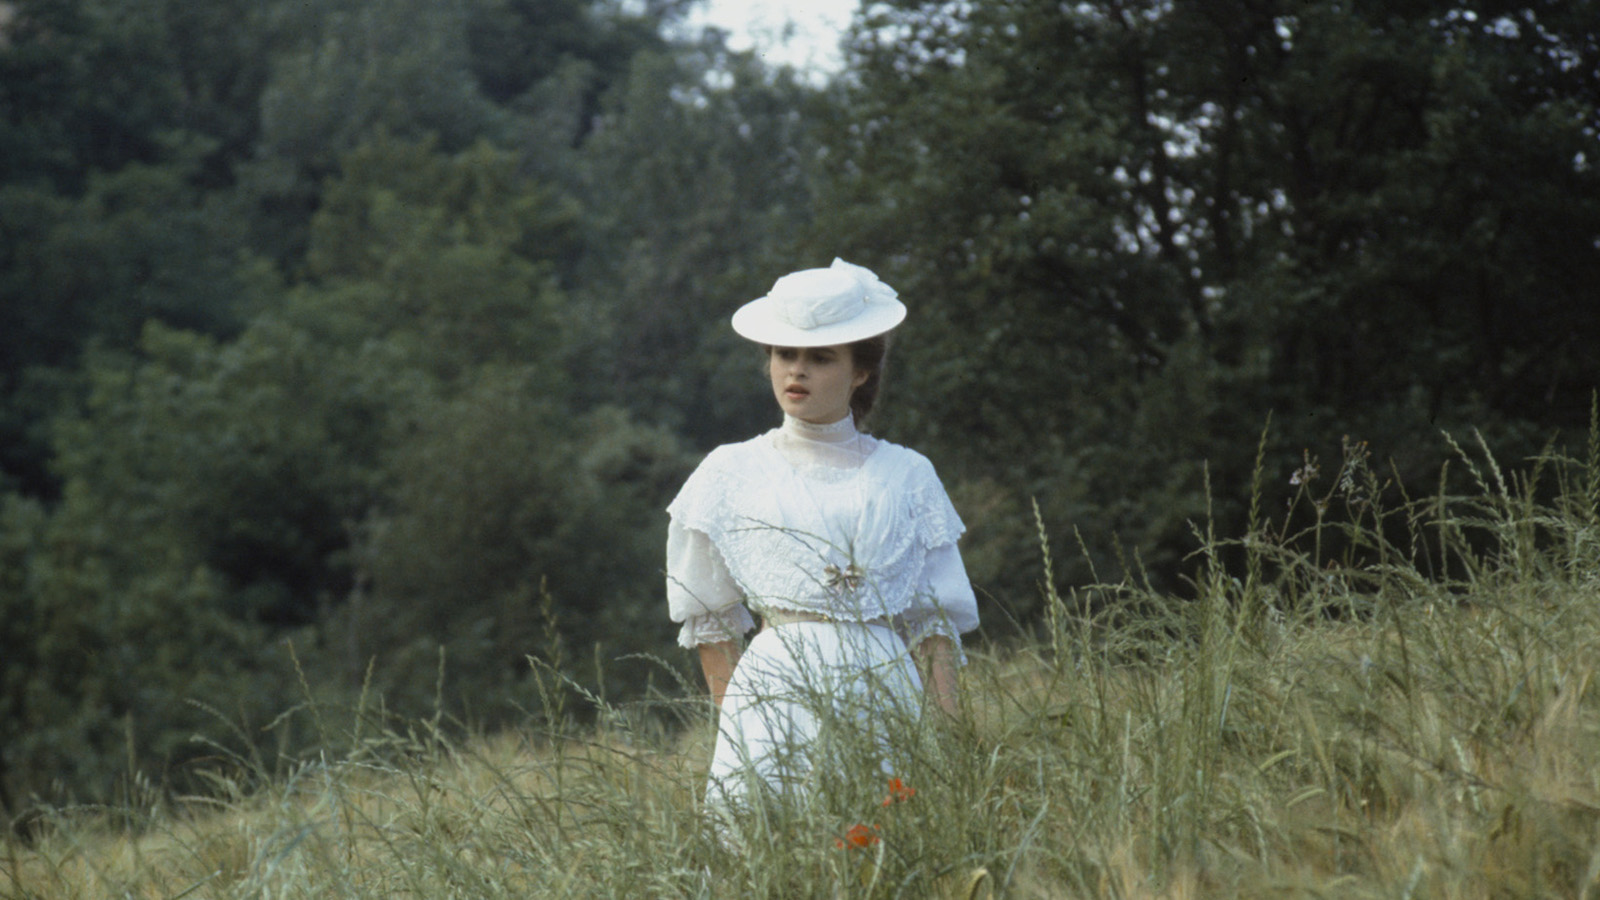 A woman in white stands in a lush green field.